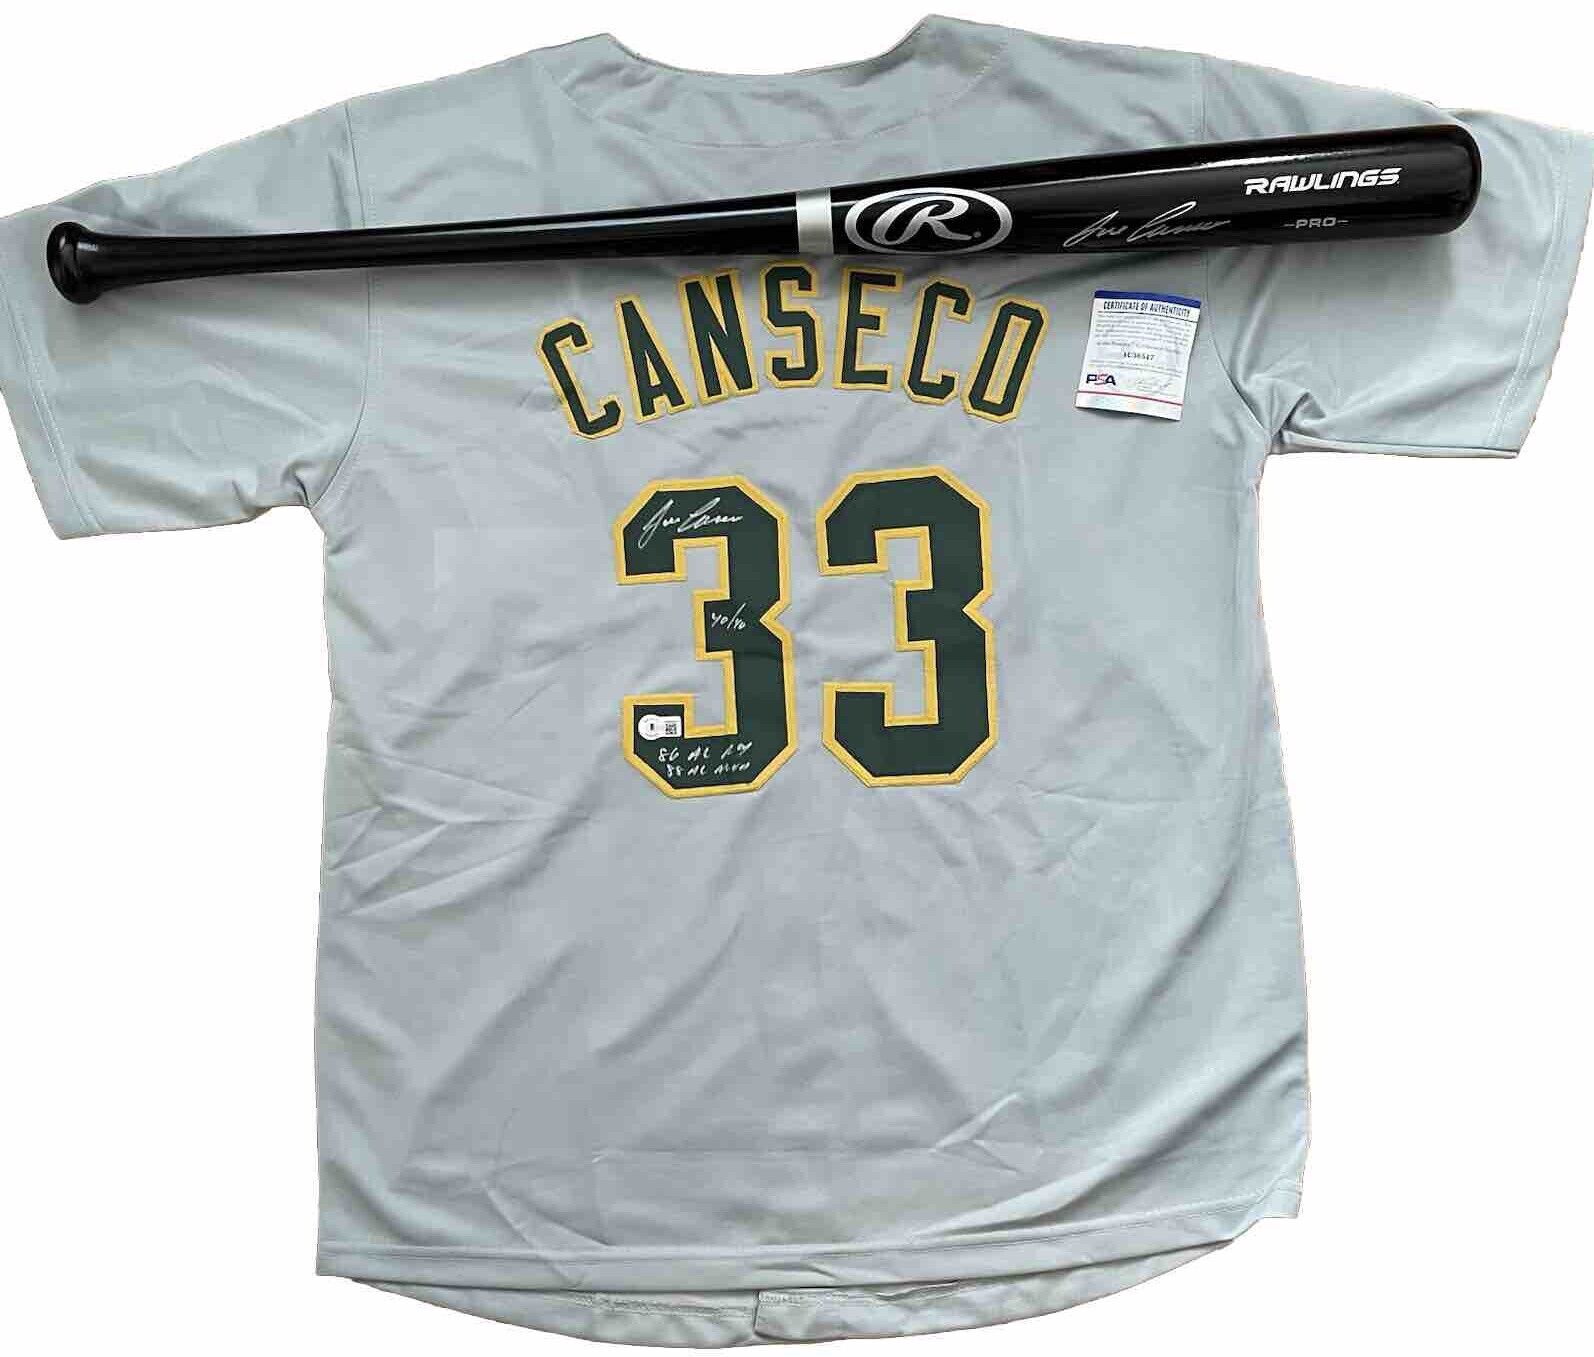 Jose Canseco Signed Black Rawlings Pro Bat & Signed Jersey - Beckett / PSA Cert